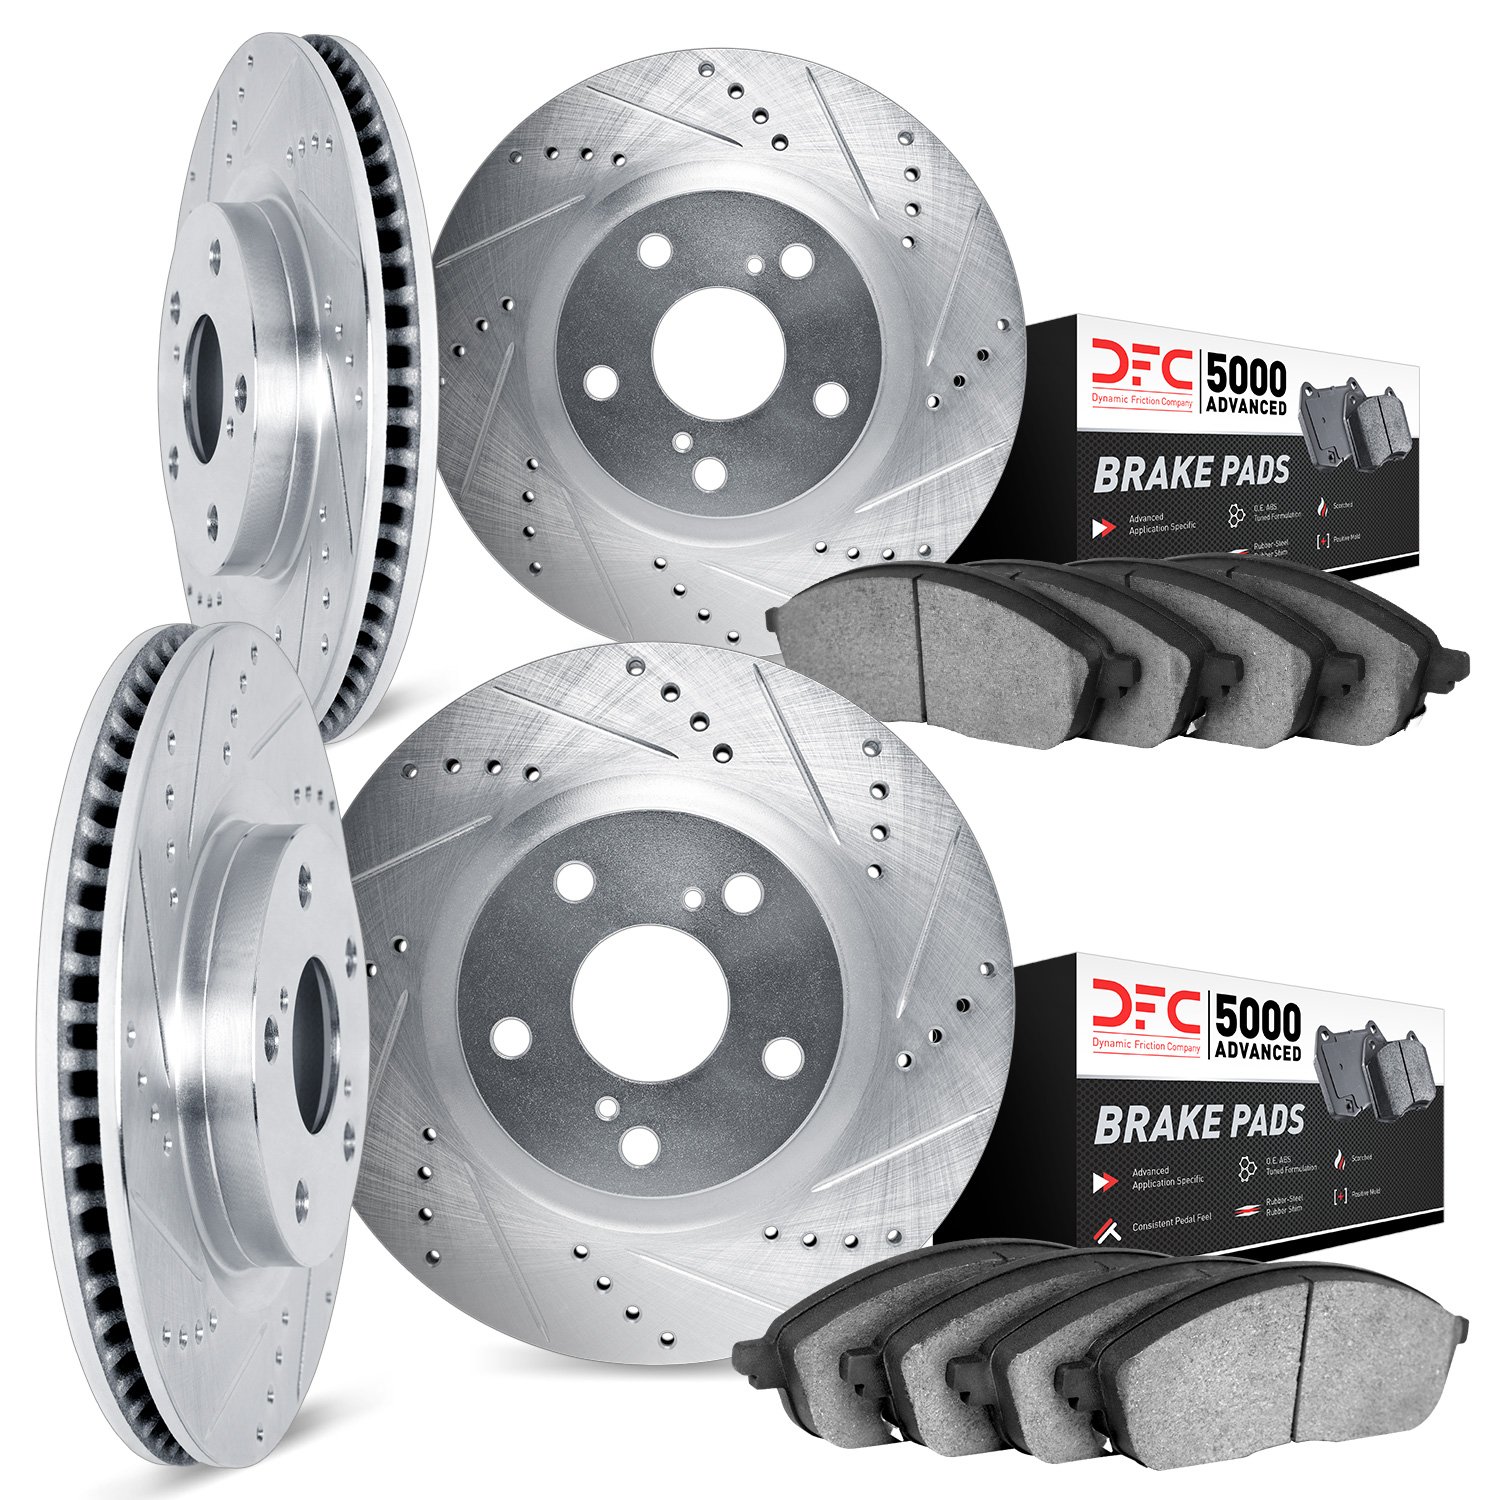 7504-31024 Drilled/Slotted Brake Rotors w/5000 Advanced Brake Pads Kit [Silver], 2008-2013 BMW, Position: Front and Rear